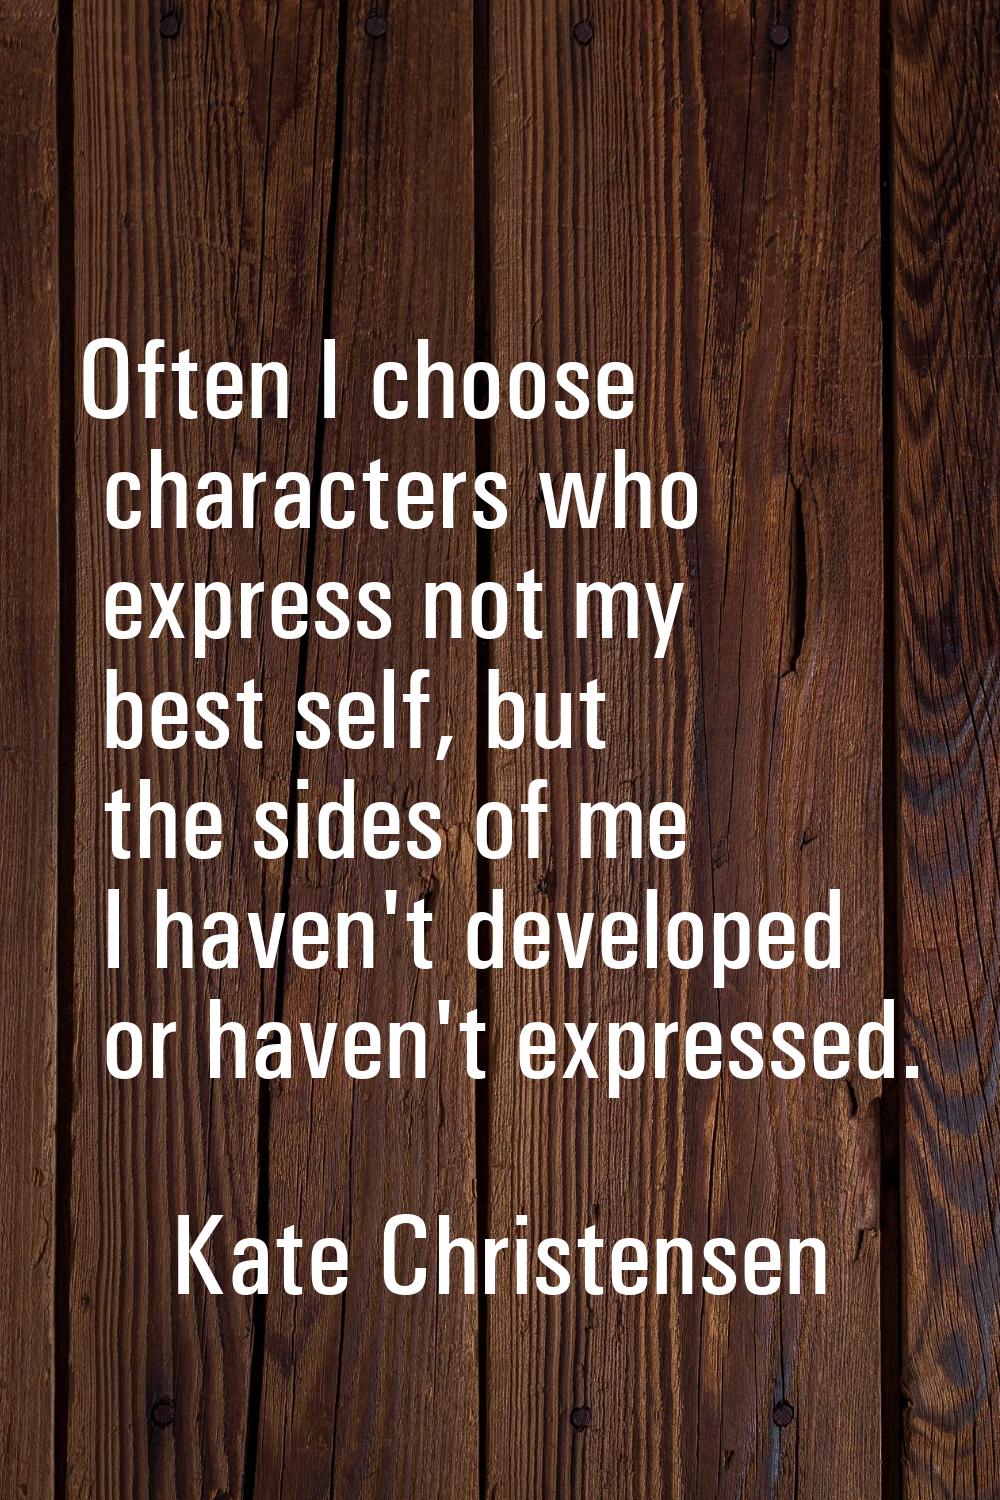 Often I choose characters who express not my best self, but the sides of me I haven't developed or 